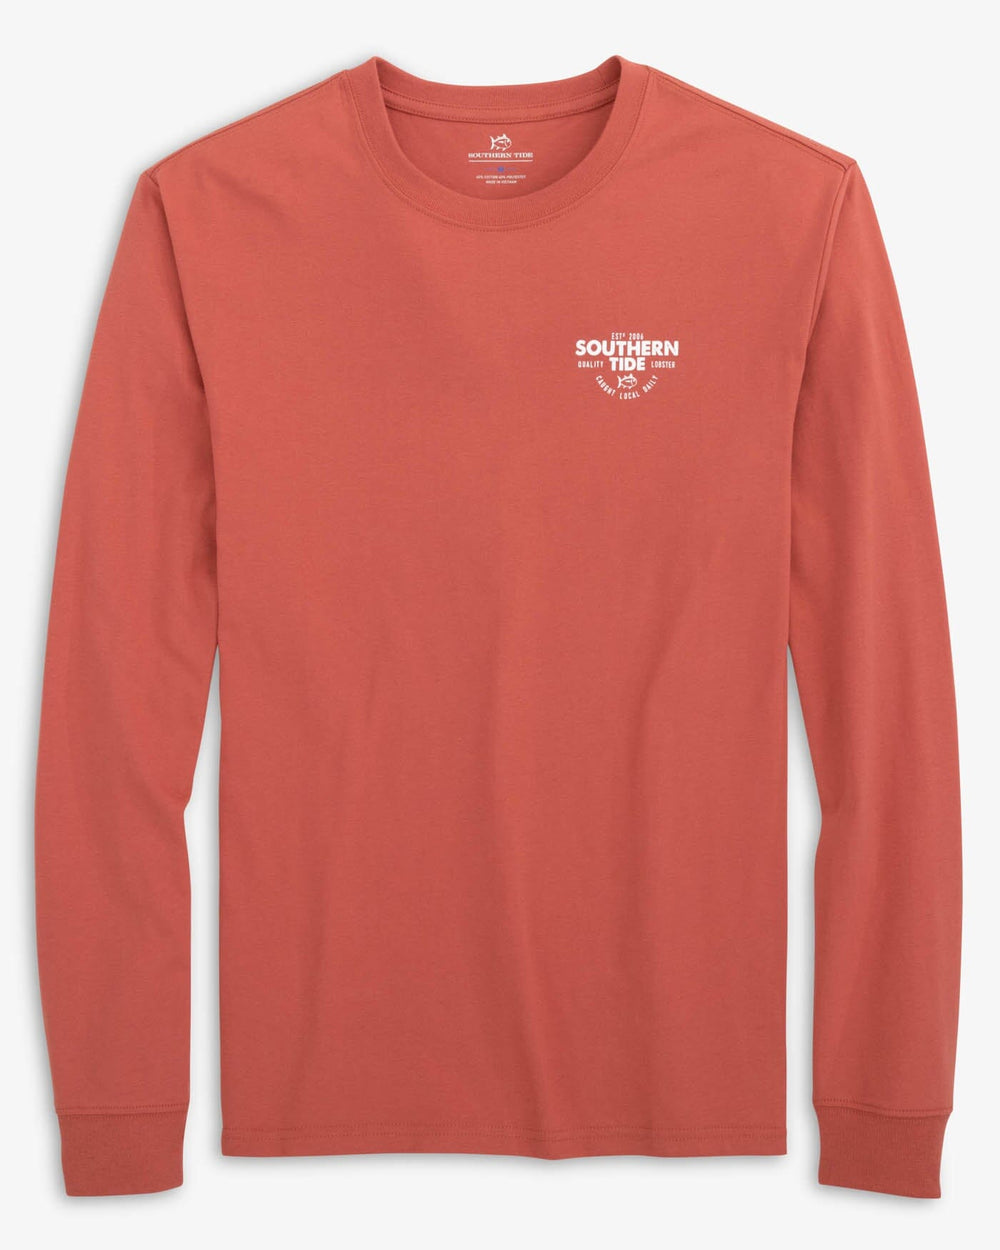 The front view of the Southern Tide Caught Local Daily Long Sleeve T-Shirt by Southern Tide - Dusty Coral